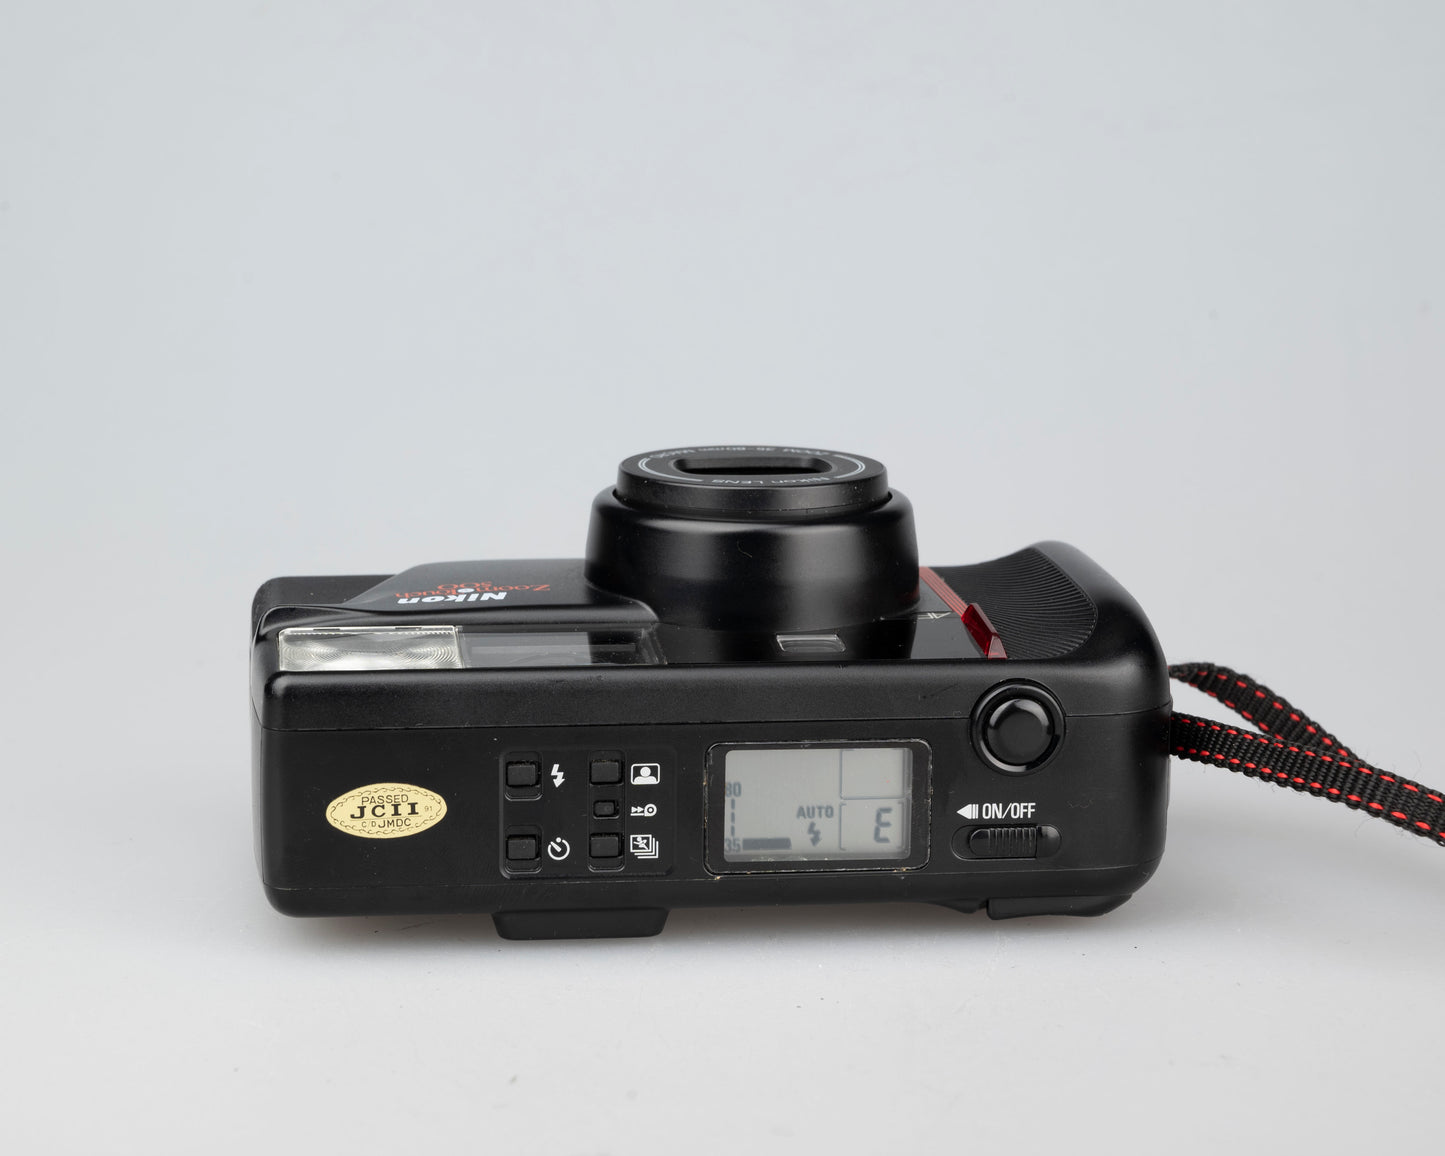 Nikon Zoom Touch 500 35mm camera (serial 5059546)